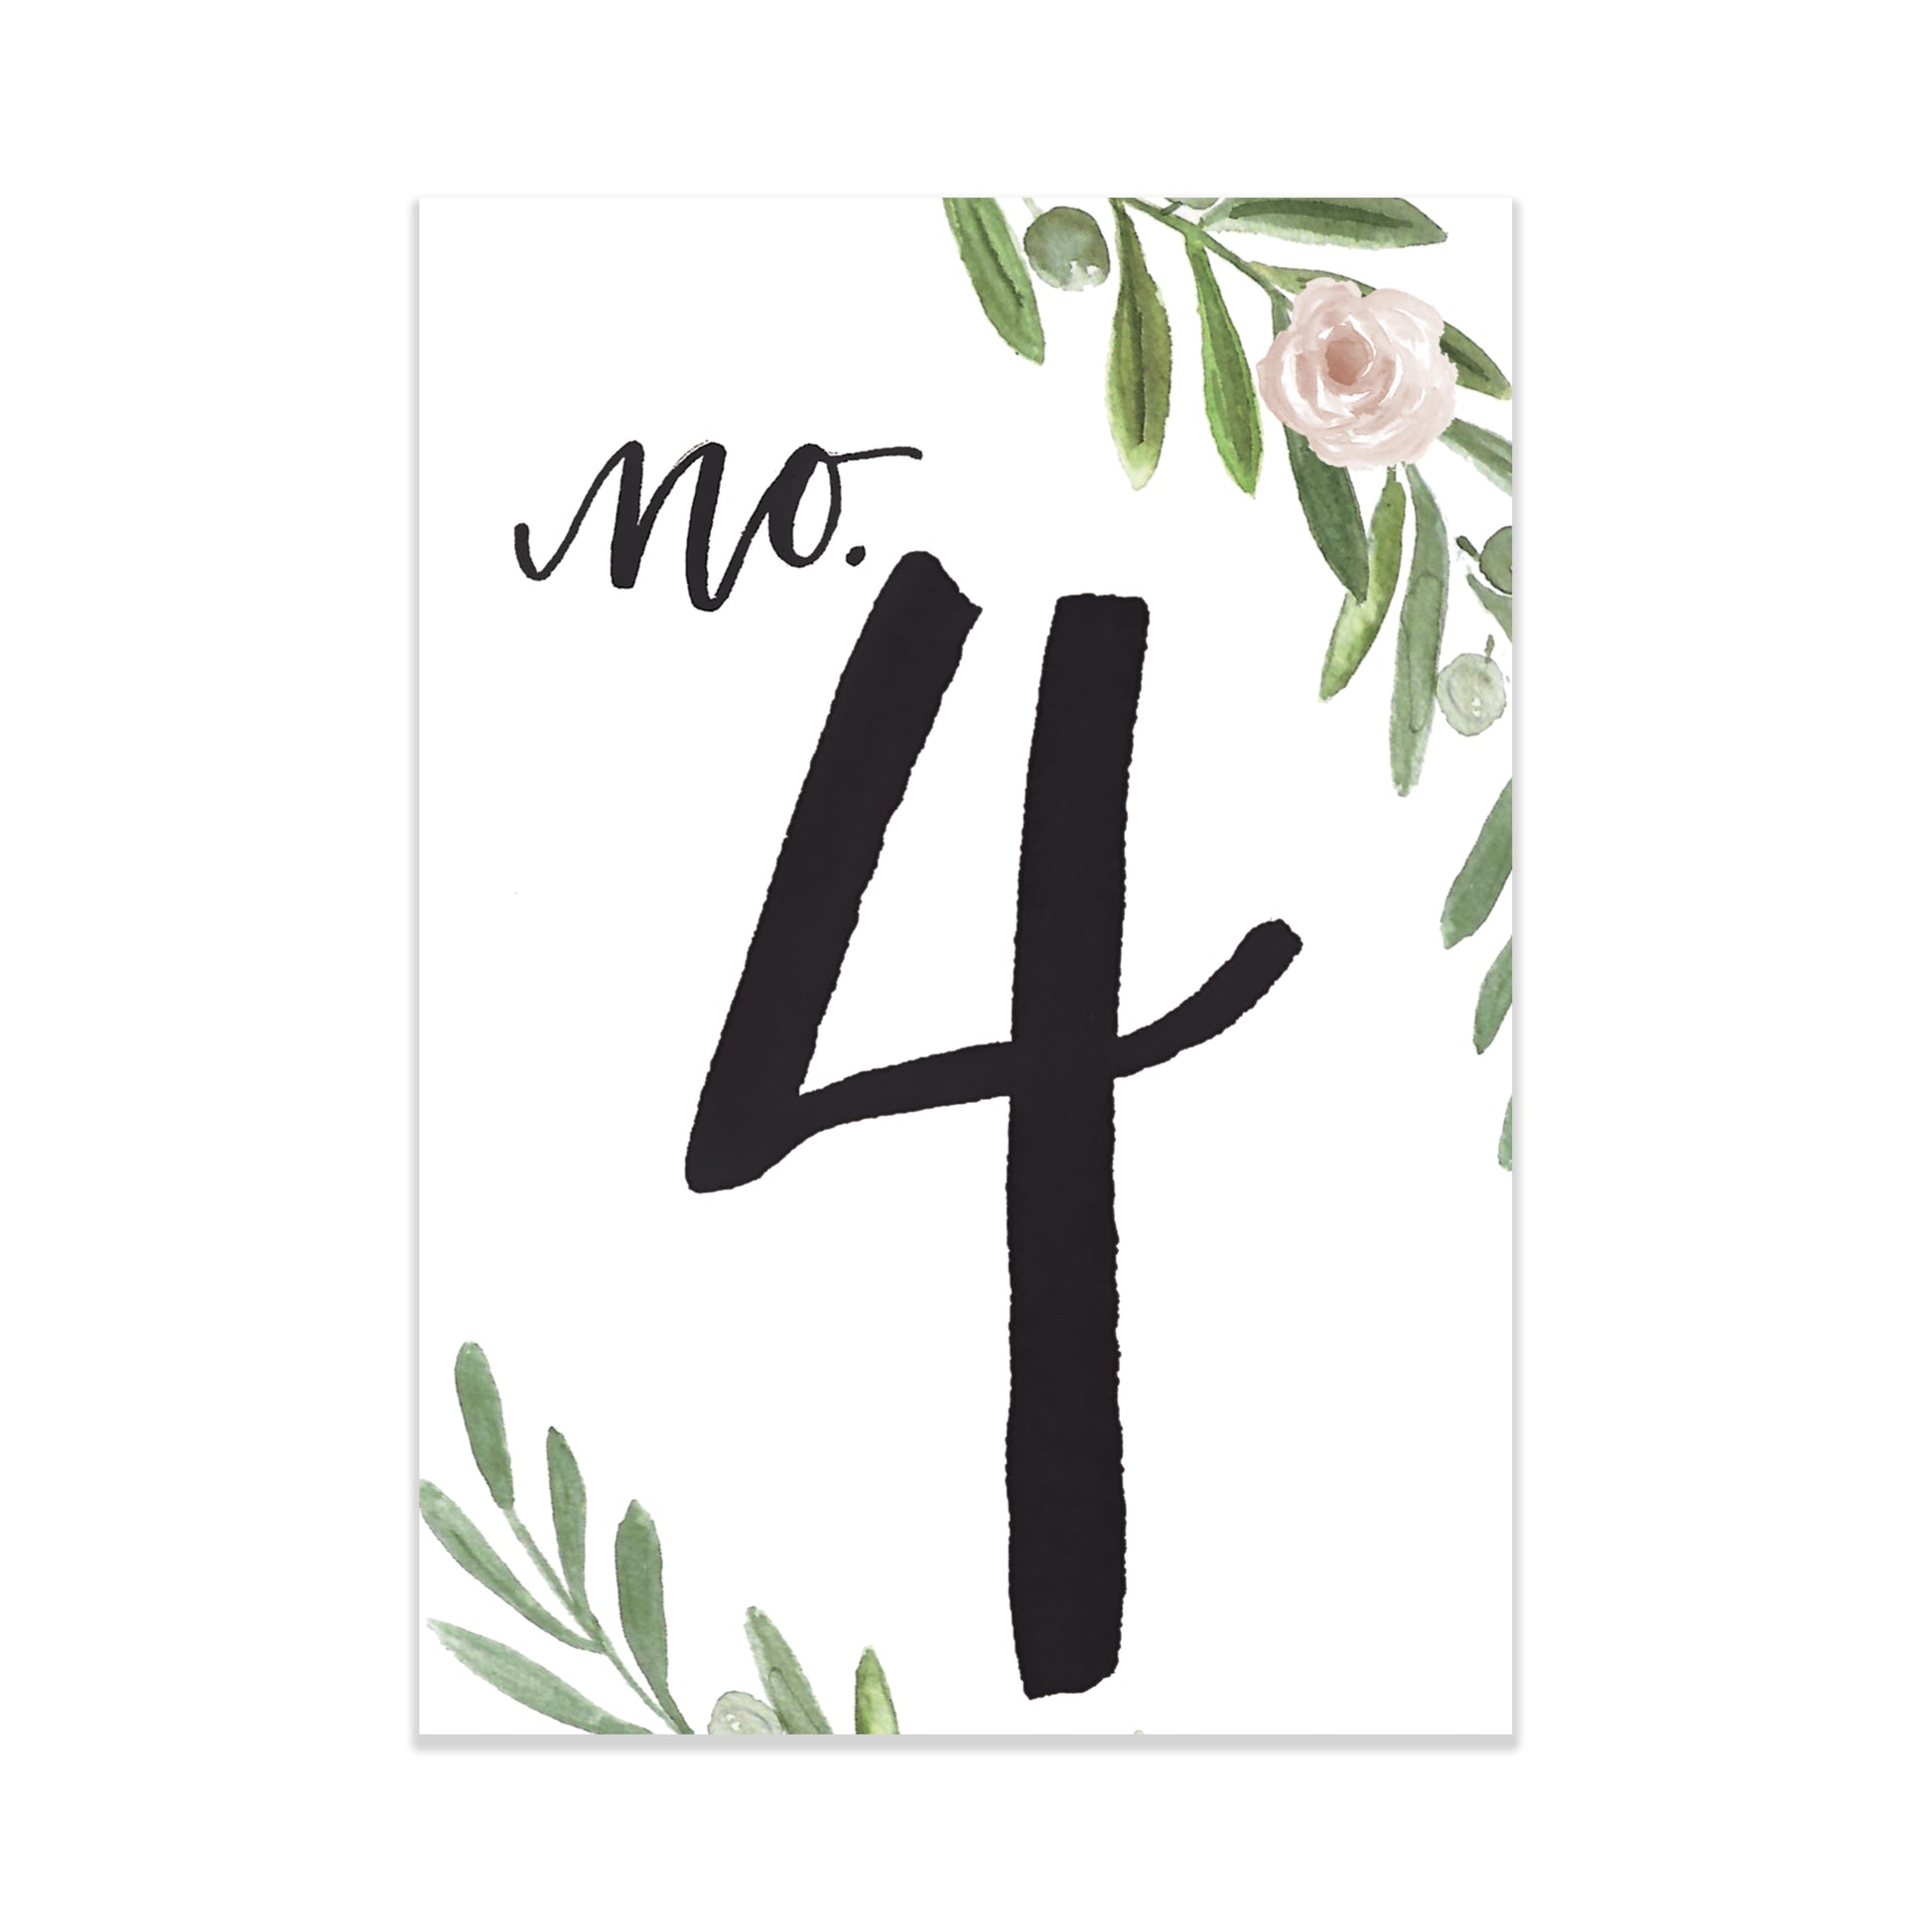 Oh Joyful Day Wedding Table Numbers Colorful table numbers wedding decorations jewel tone wedding jewel tone wedding decorations set of table numbers printed table numbers Pittsburgh weddings watercolor floral table numbers floral table numbers greenery table numbers watercolor wedding details 